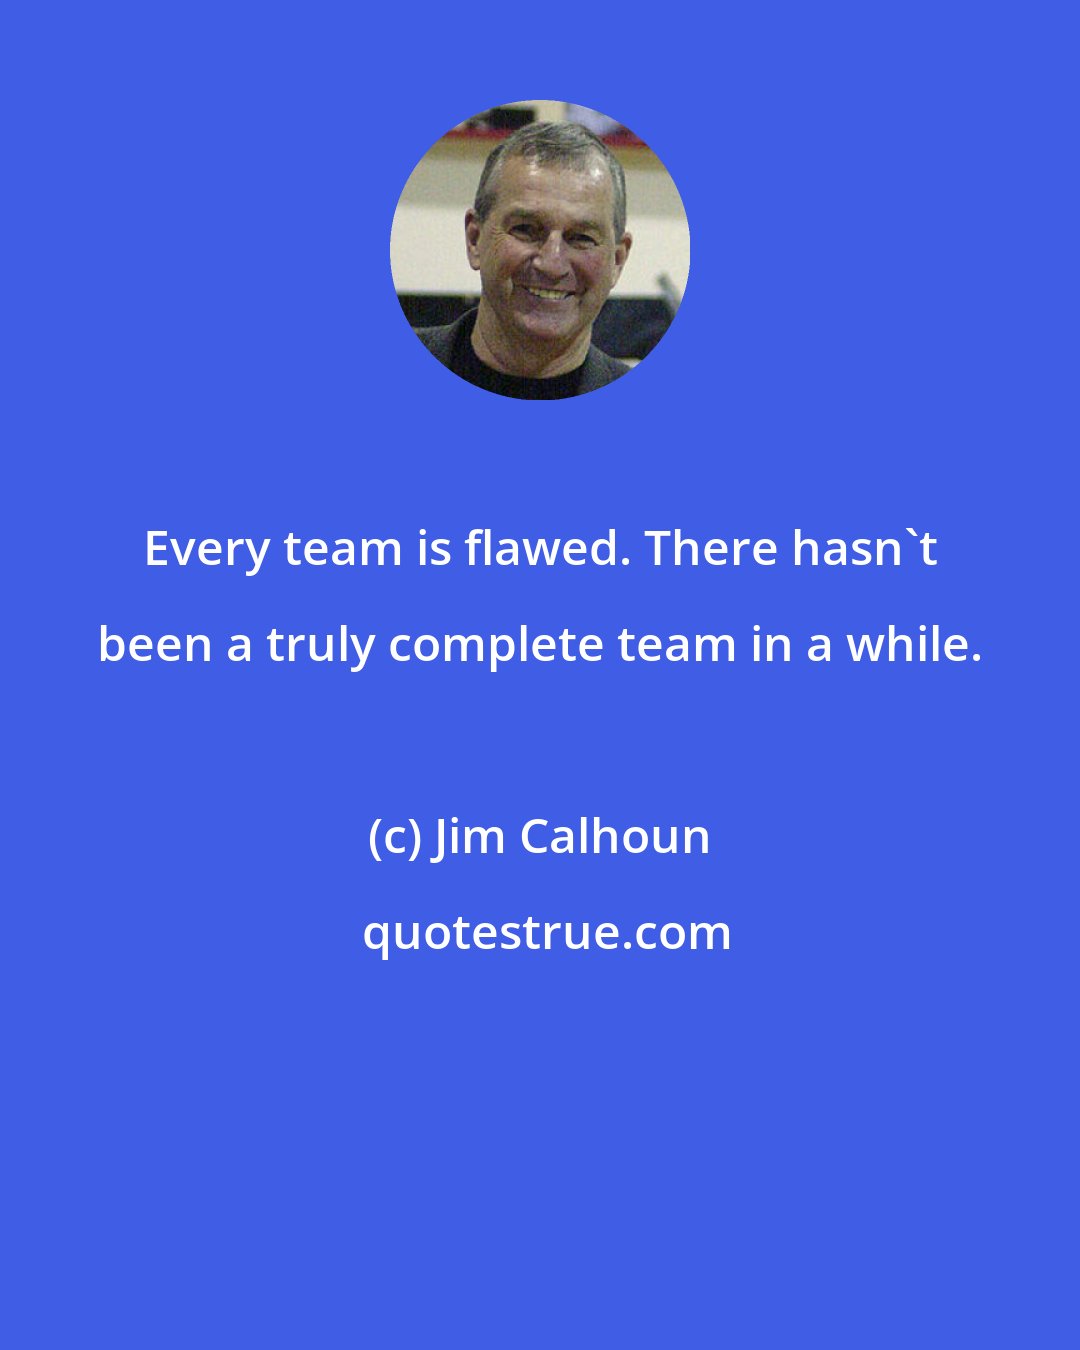 Jim Calhoun: Every team is flawed. There hasn't been a truly complete team in a while.